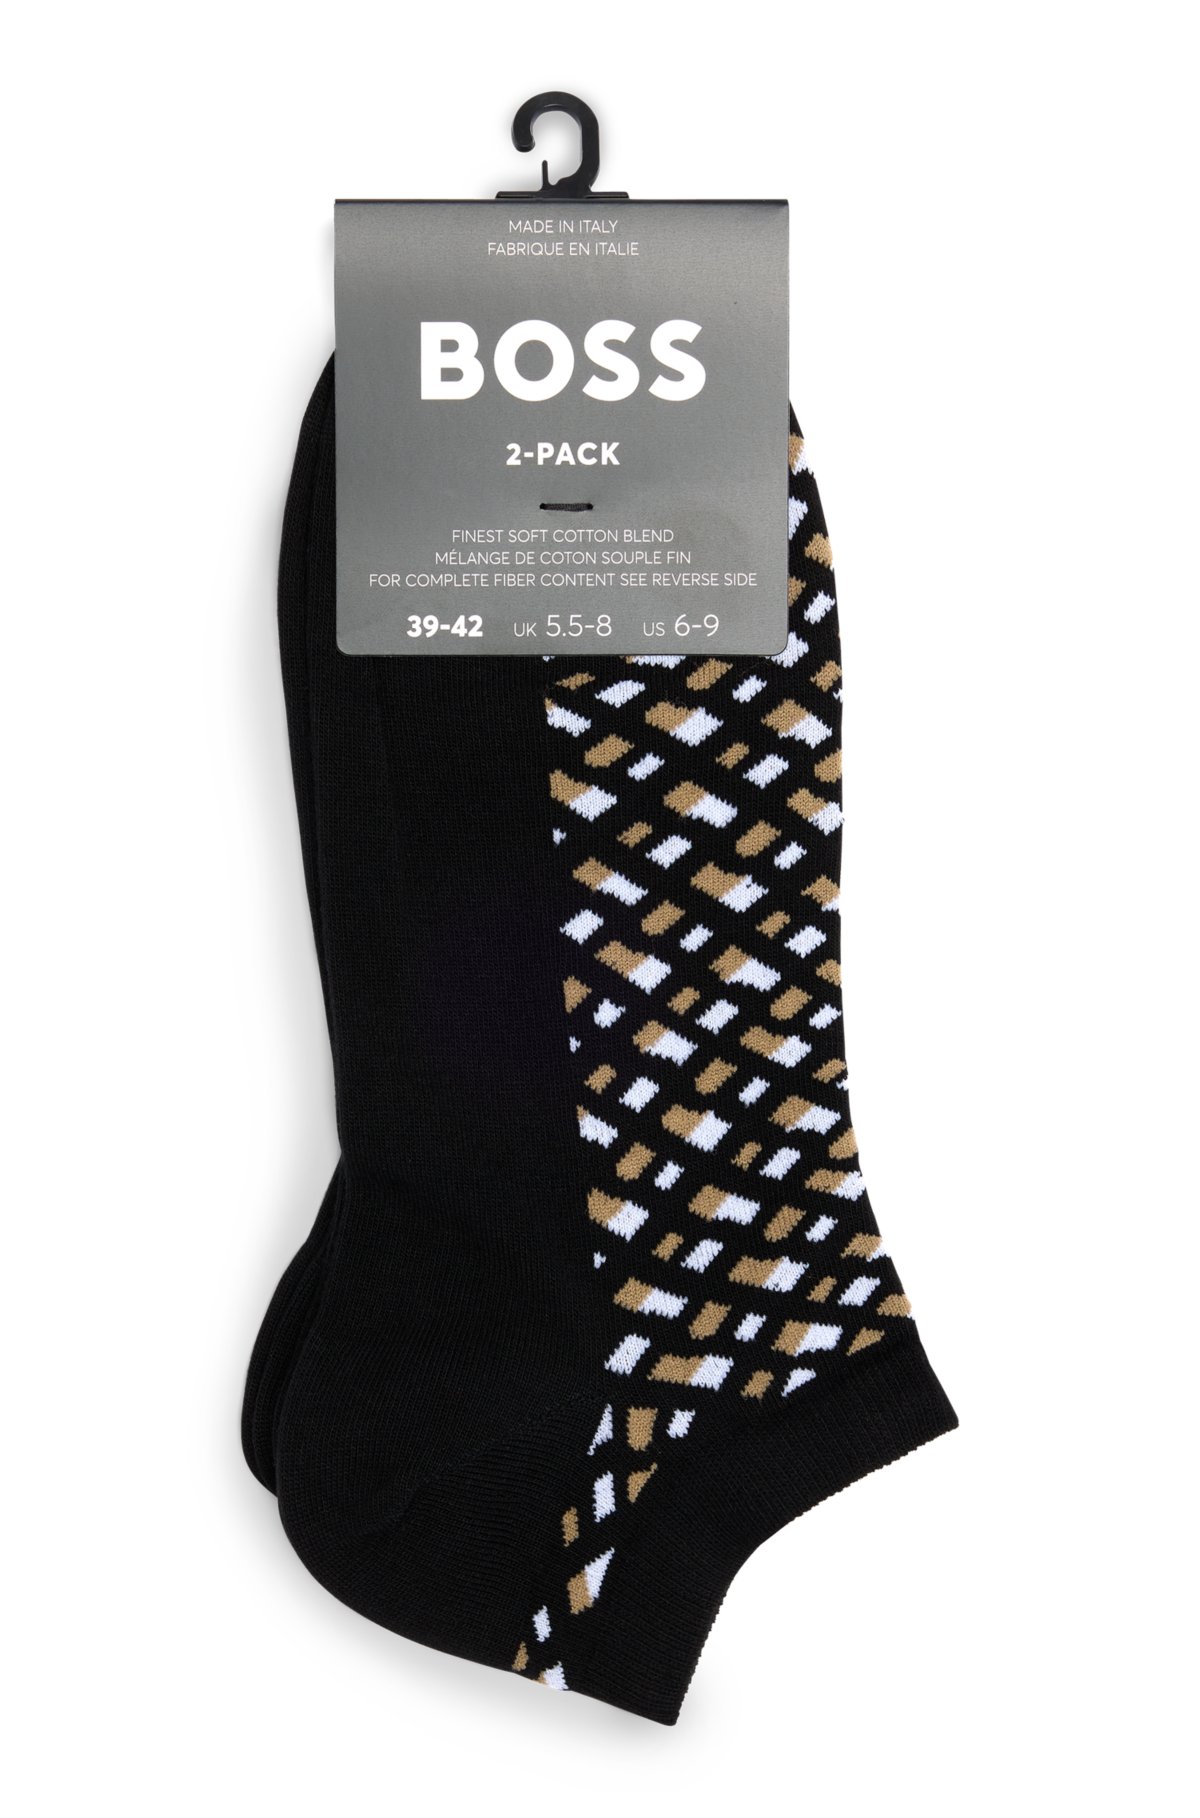 Two-pack of ankle socks in a cotton blend, Black